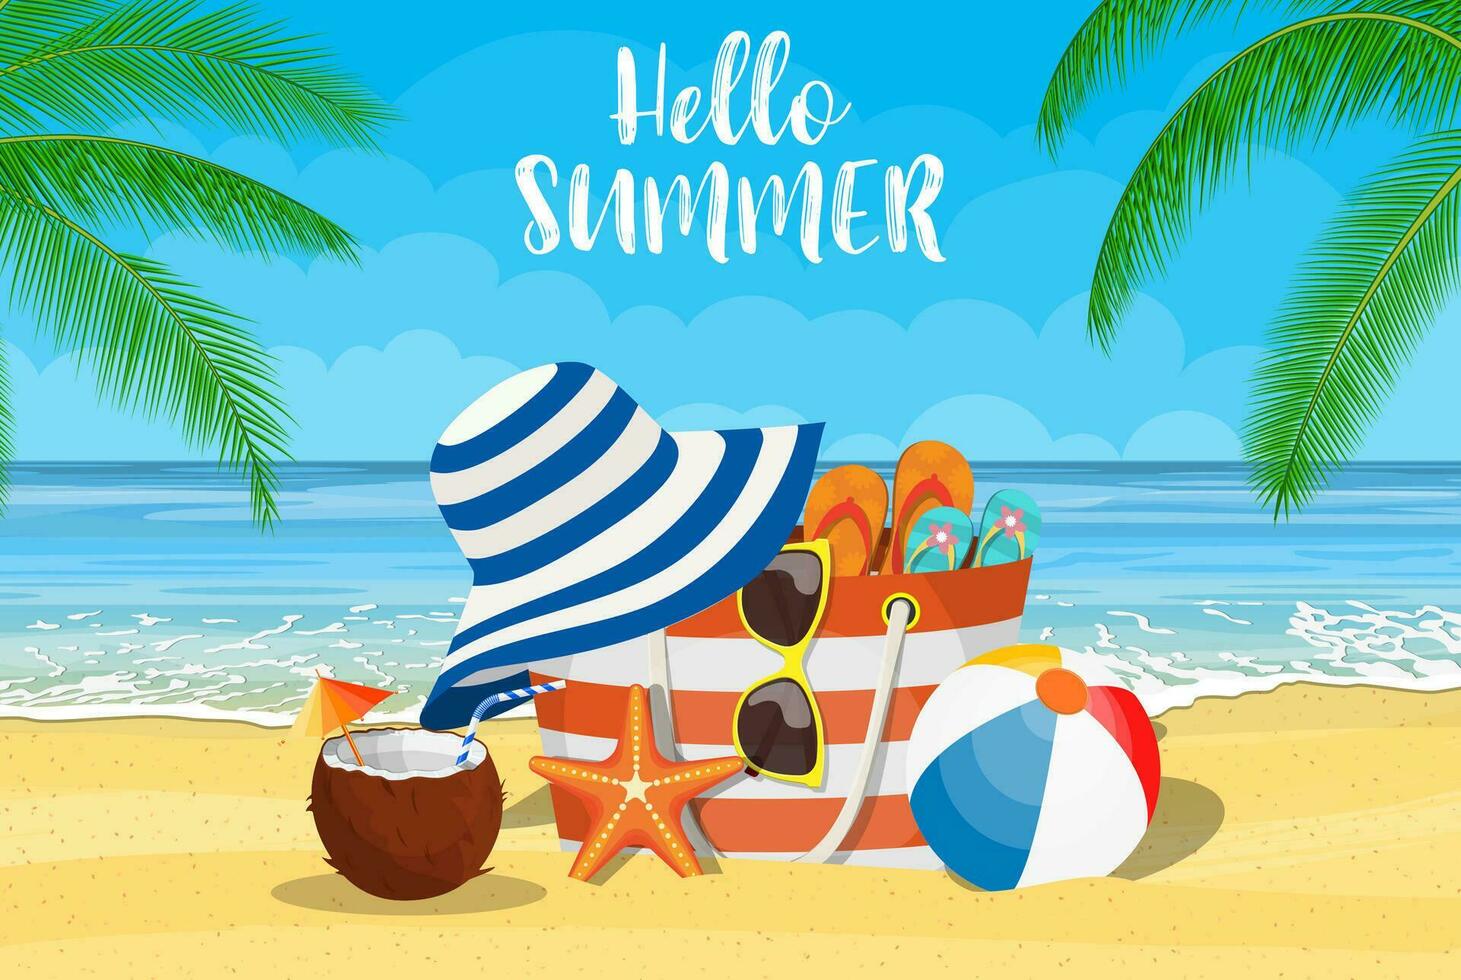 Summer accessories for the beach. Bag, sunglasses, flip flops, starfish, ball. Against the background of the sun the sea and palm trees. Vector illustration in flat style